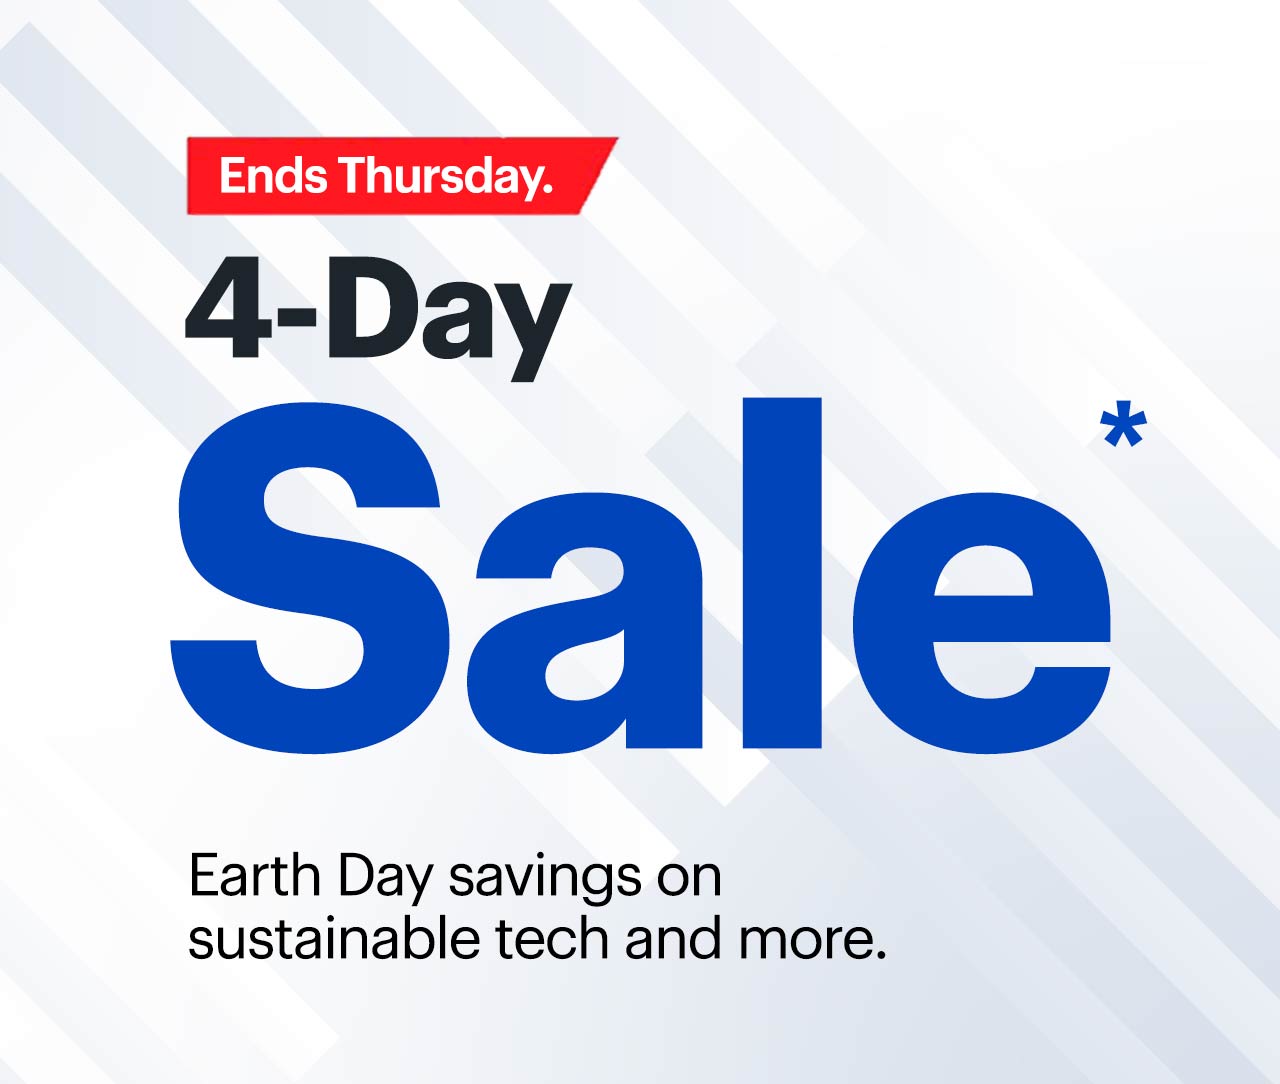 4-Day Sale ends Thursday. Earth Day savings on sustainable tech and more. Reference disclaimer.